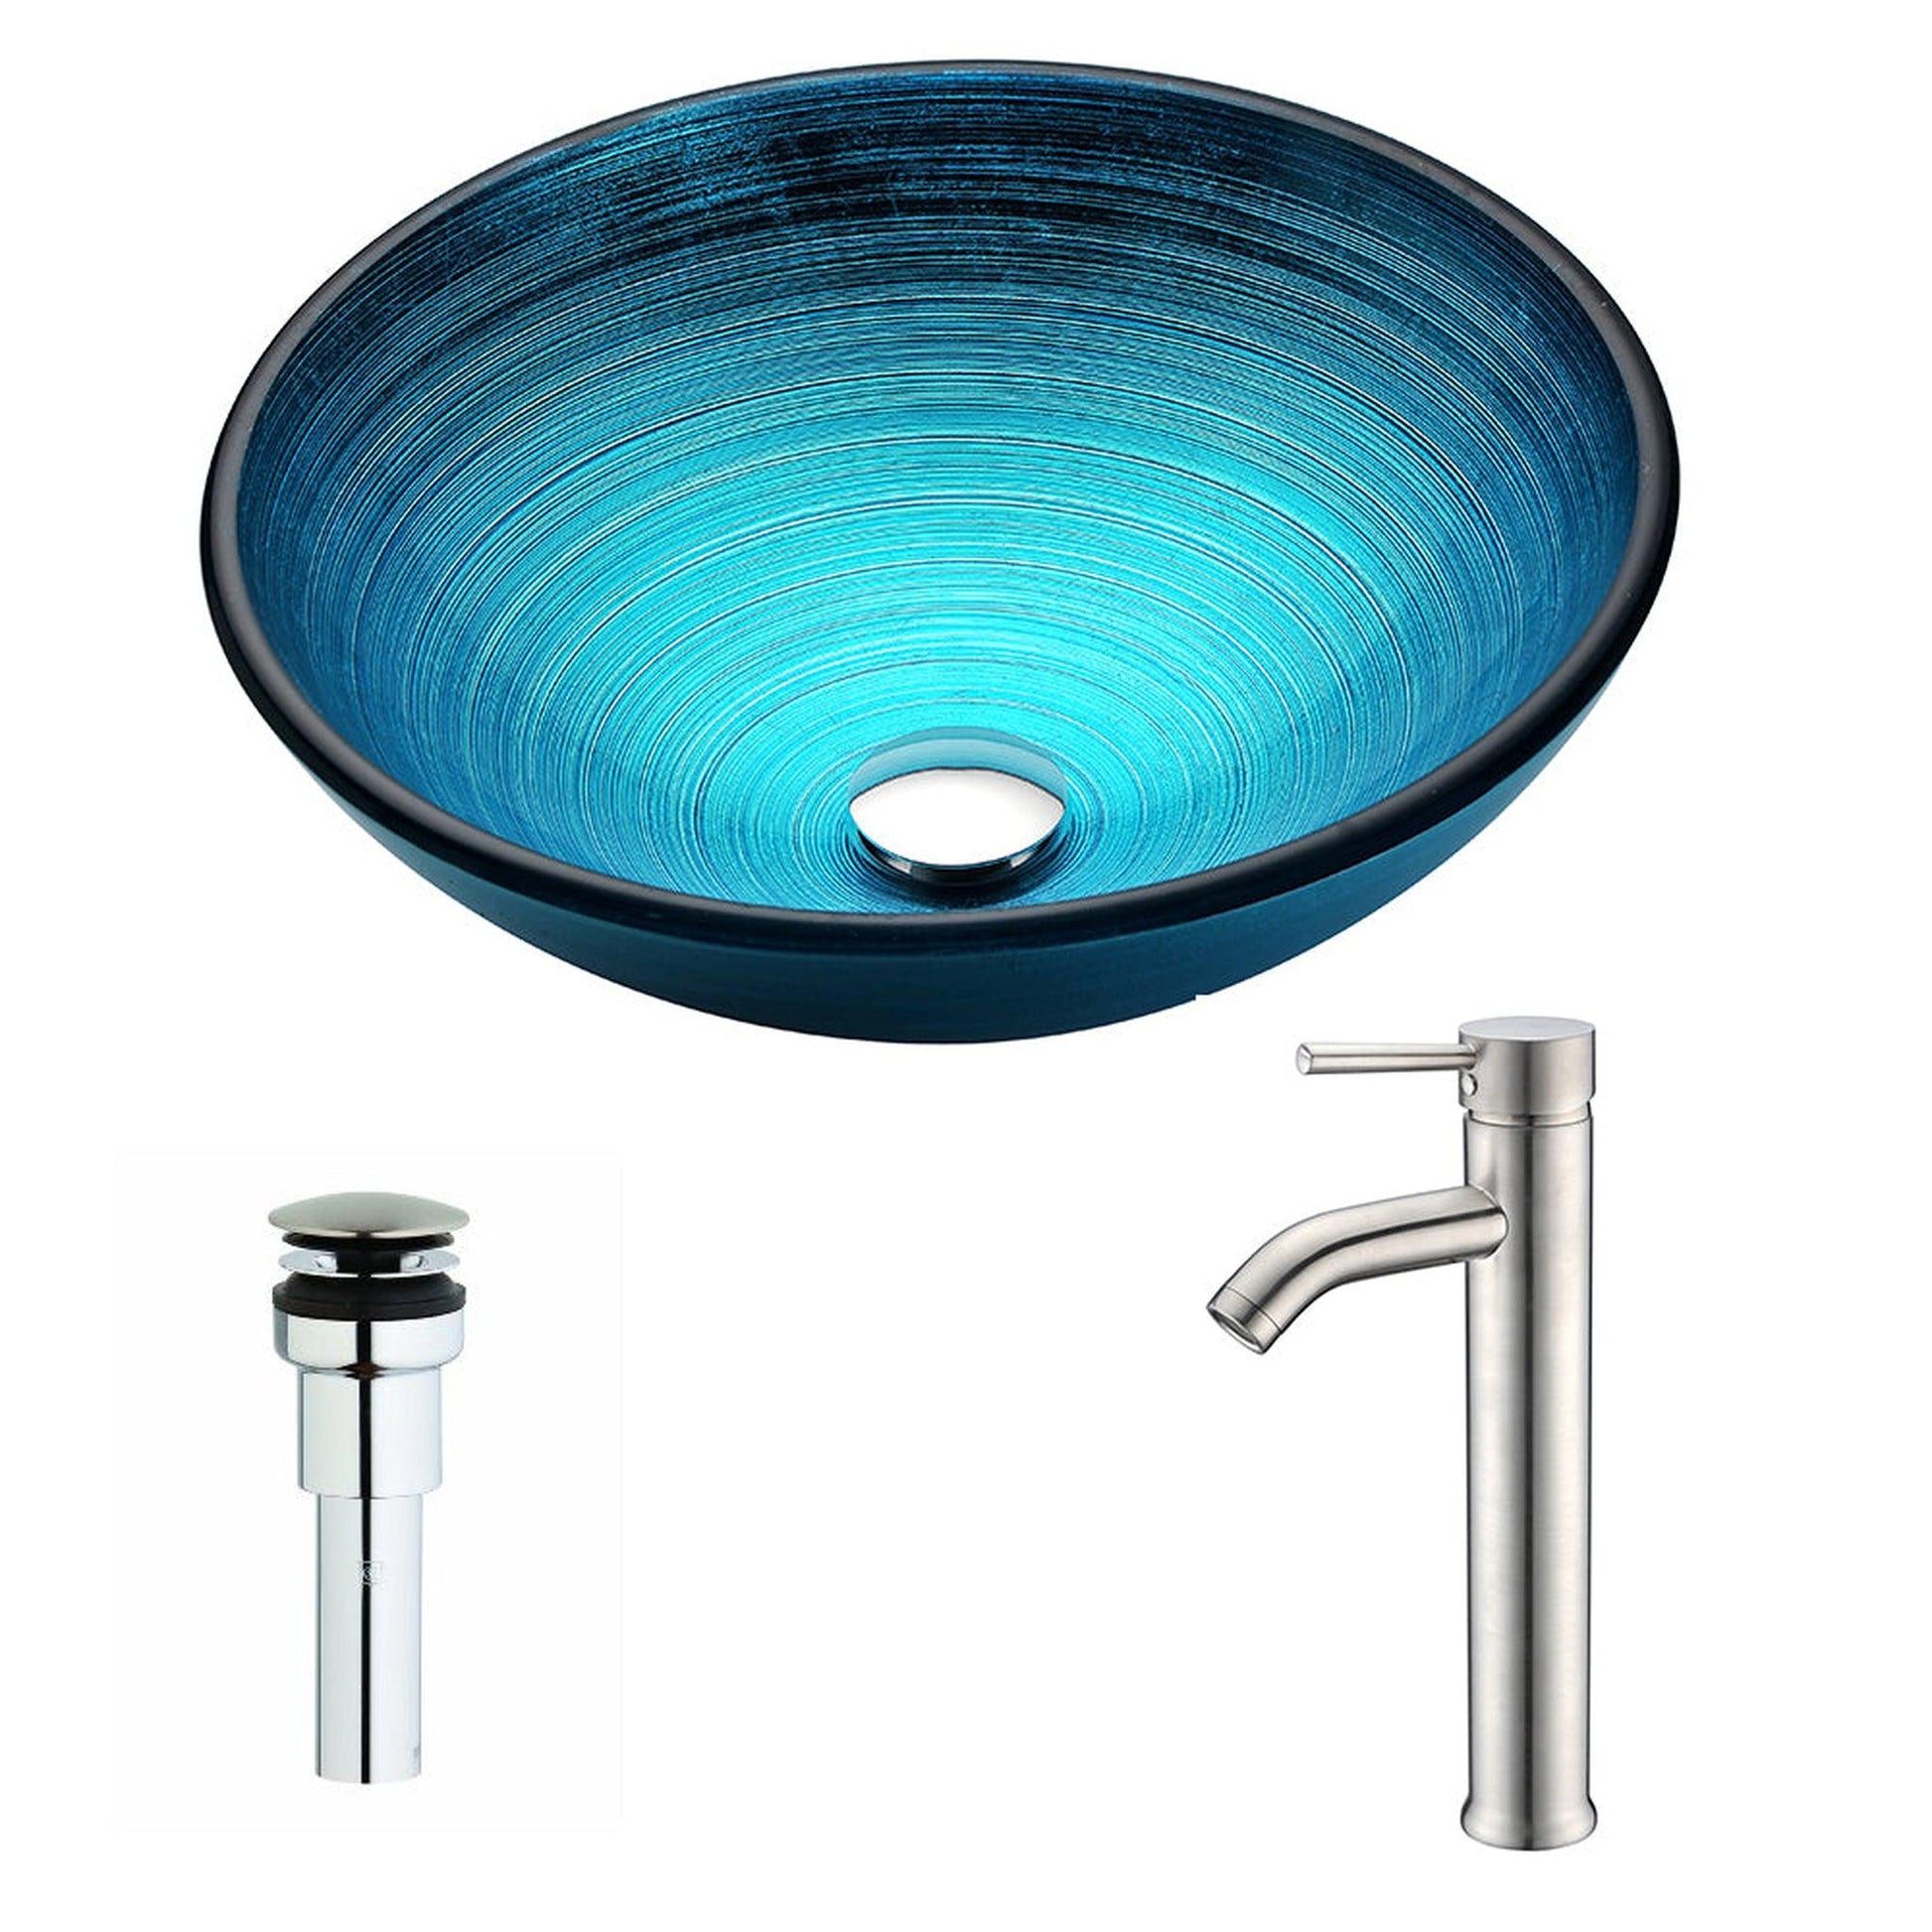 ANZZI Enti Series 17" x 17" Round Lustrous Blue Deco-Glass Vessel Sink Finish With Chrome Pop-Up Drain and Brushed Nickel Fann Faucet